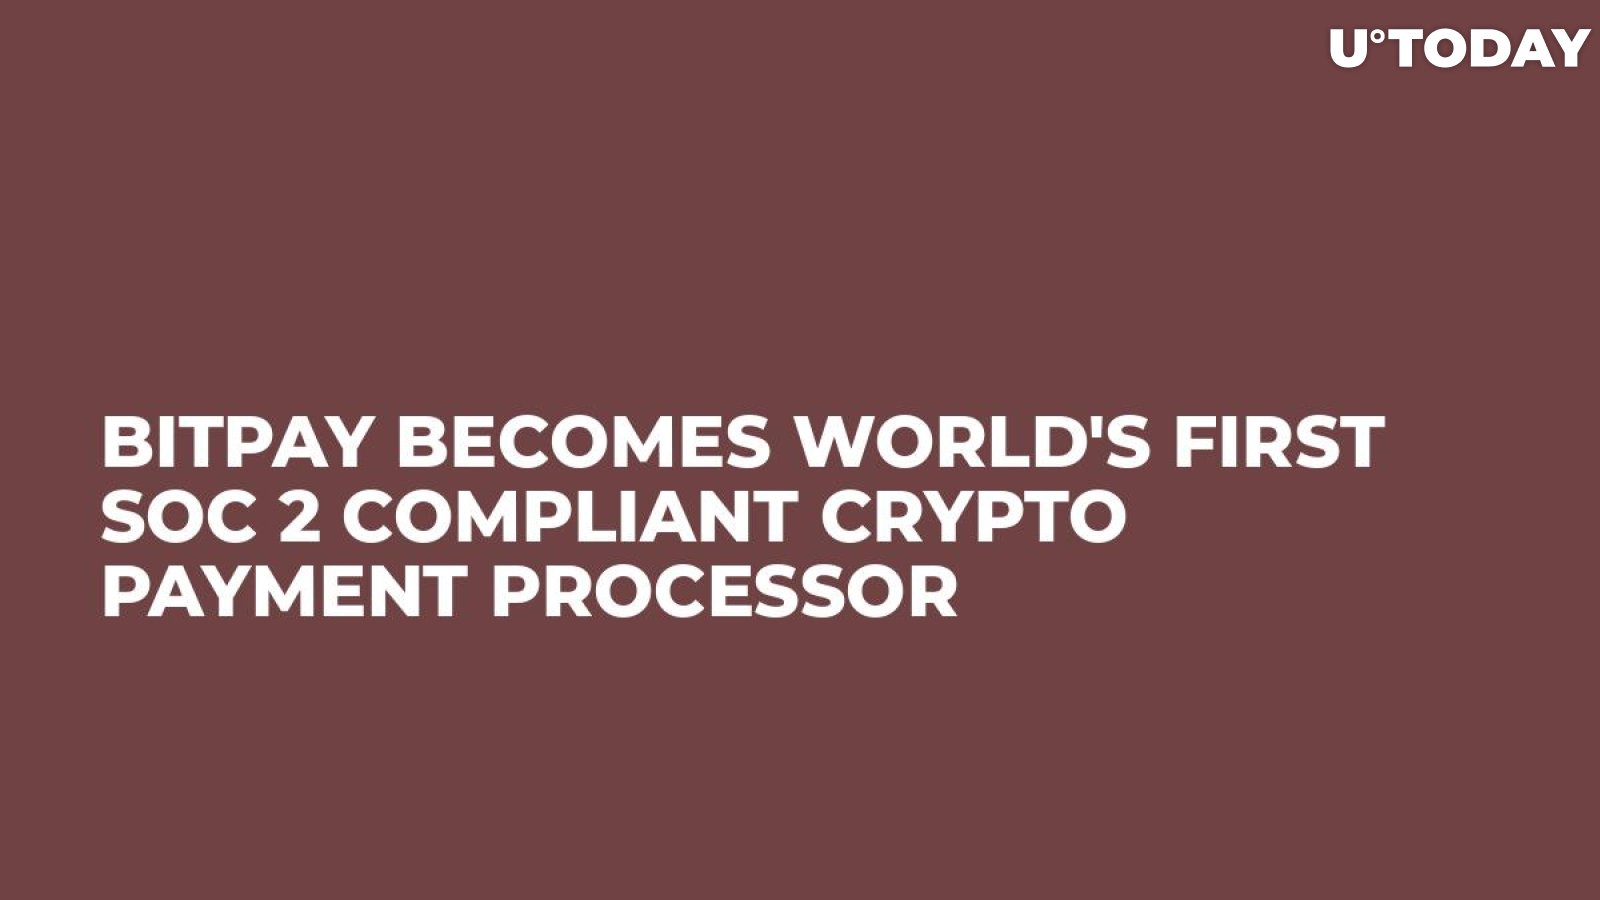 BitPay Becomes World's First SOC 2 Compliant Crypto Payment Processor